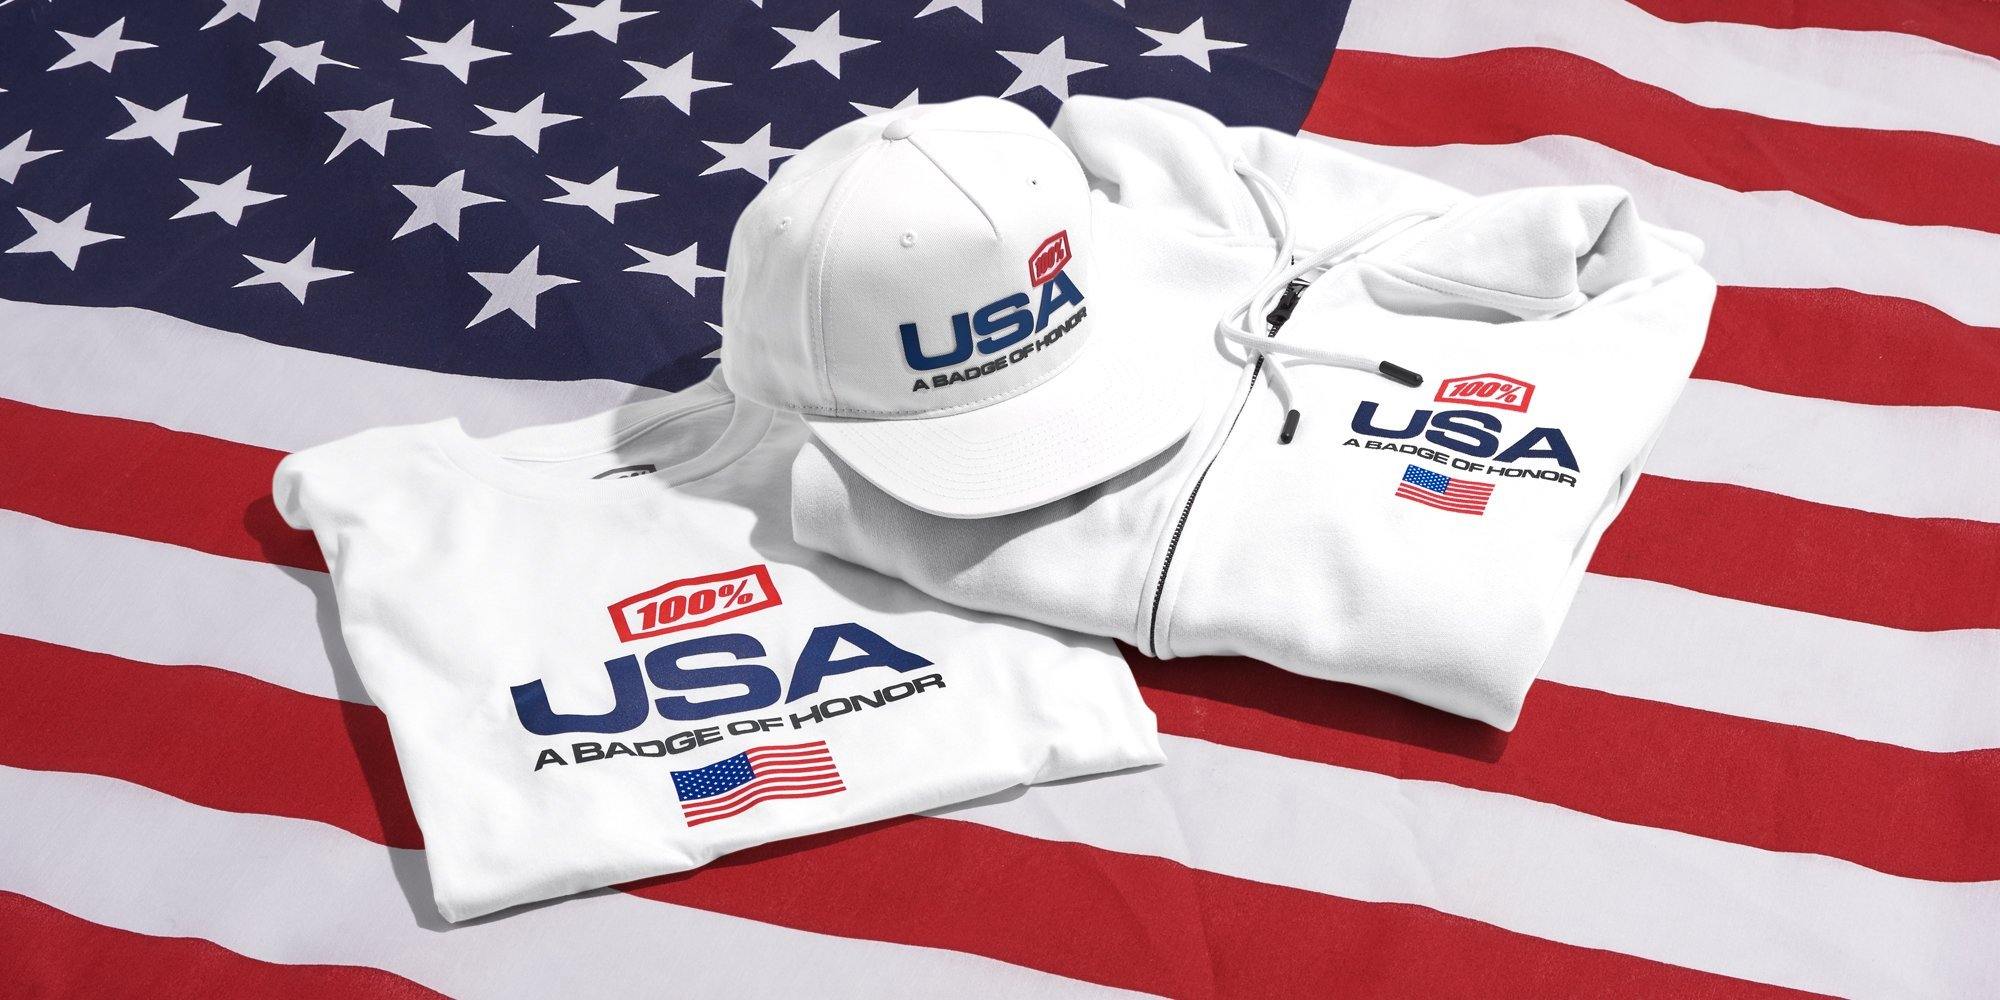 The USA Limited Edition Capsule - 100% Europe